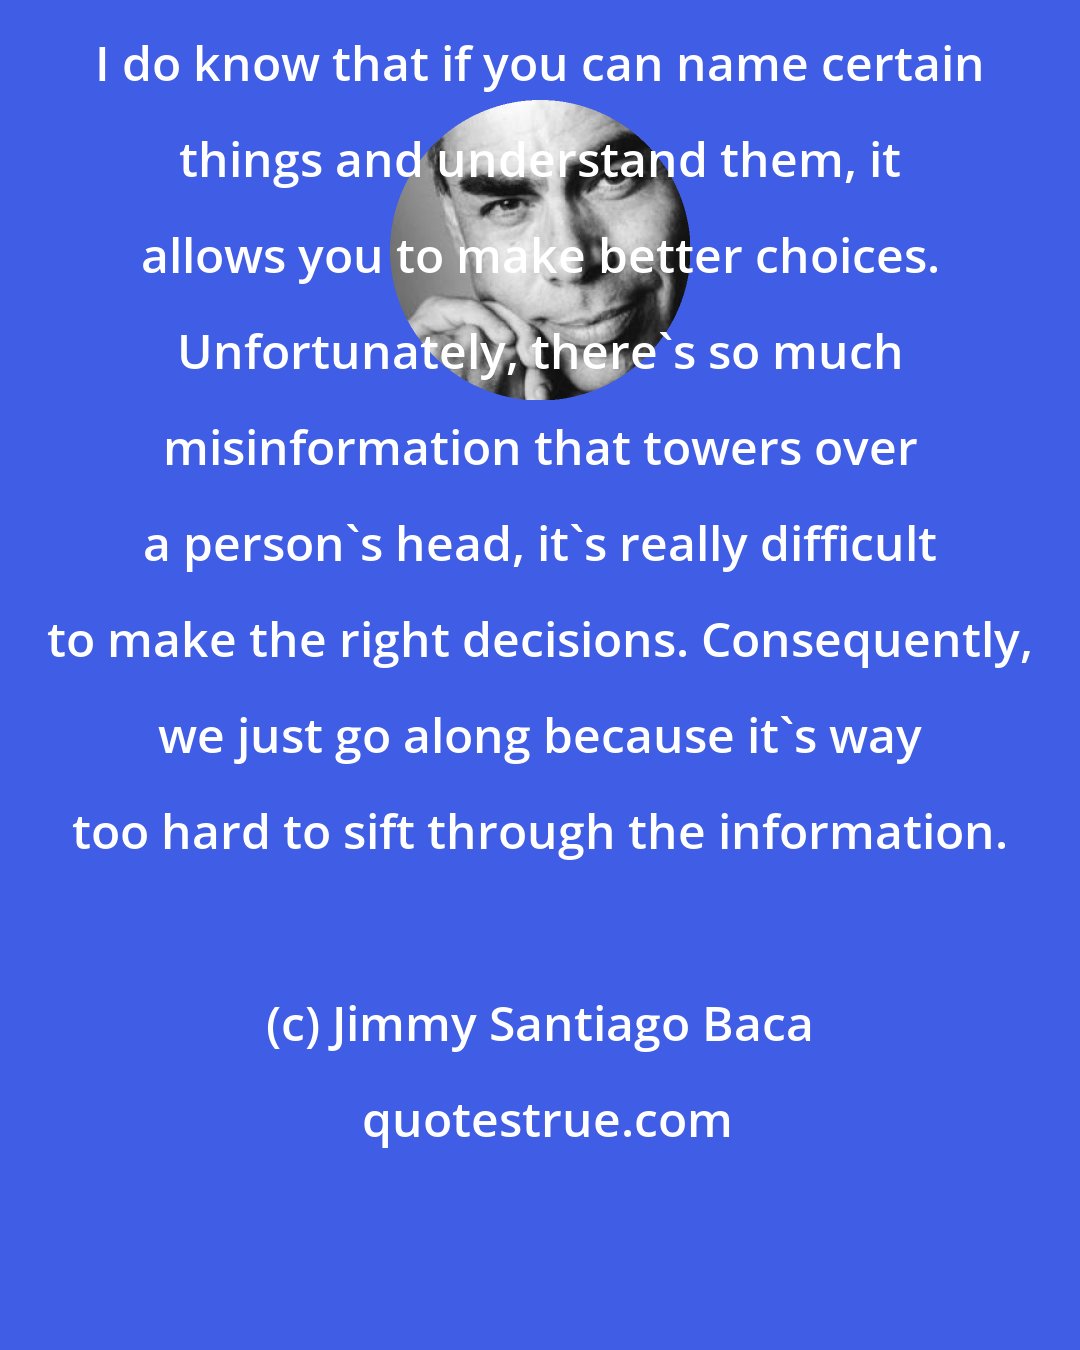 Jimmy Santiago Baca: I do know that if you can name certain things and understand them, it allows you to make better choices. Unfortunately, there's so much misinformation that towers over a person's head, it's really difficult to make the right decisions. Consequently, we just go along because it's way too hard to sift through the information.